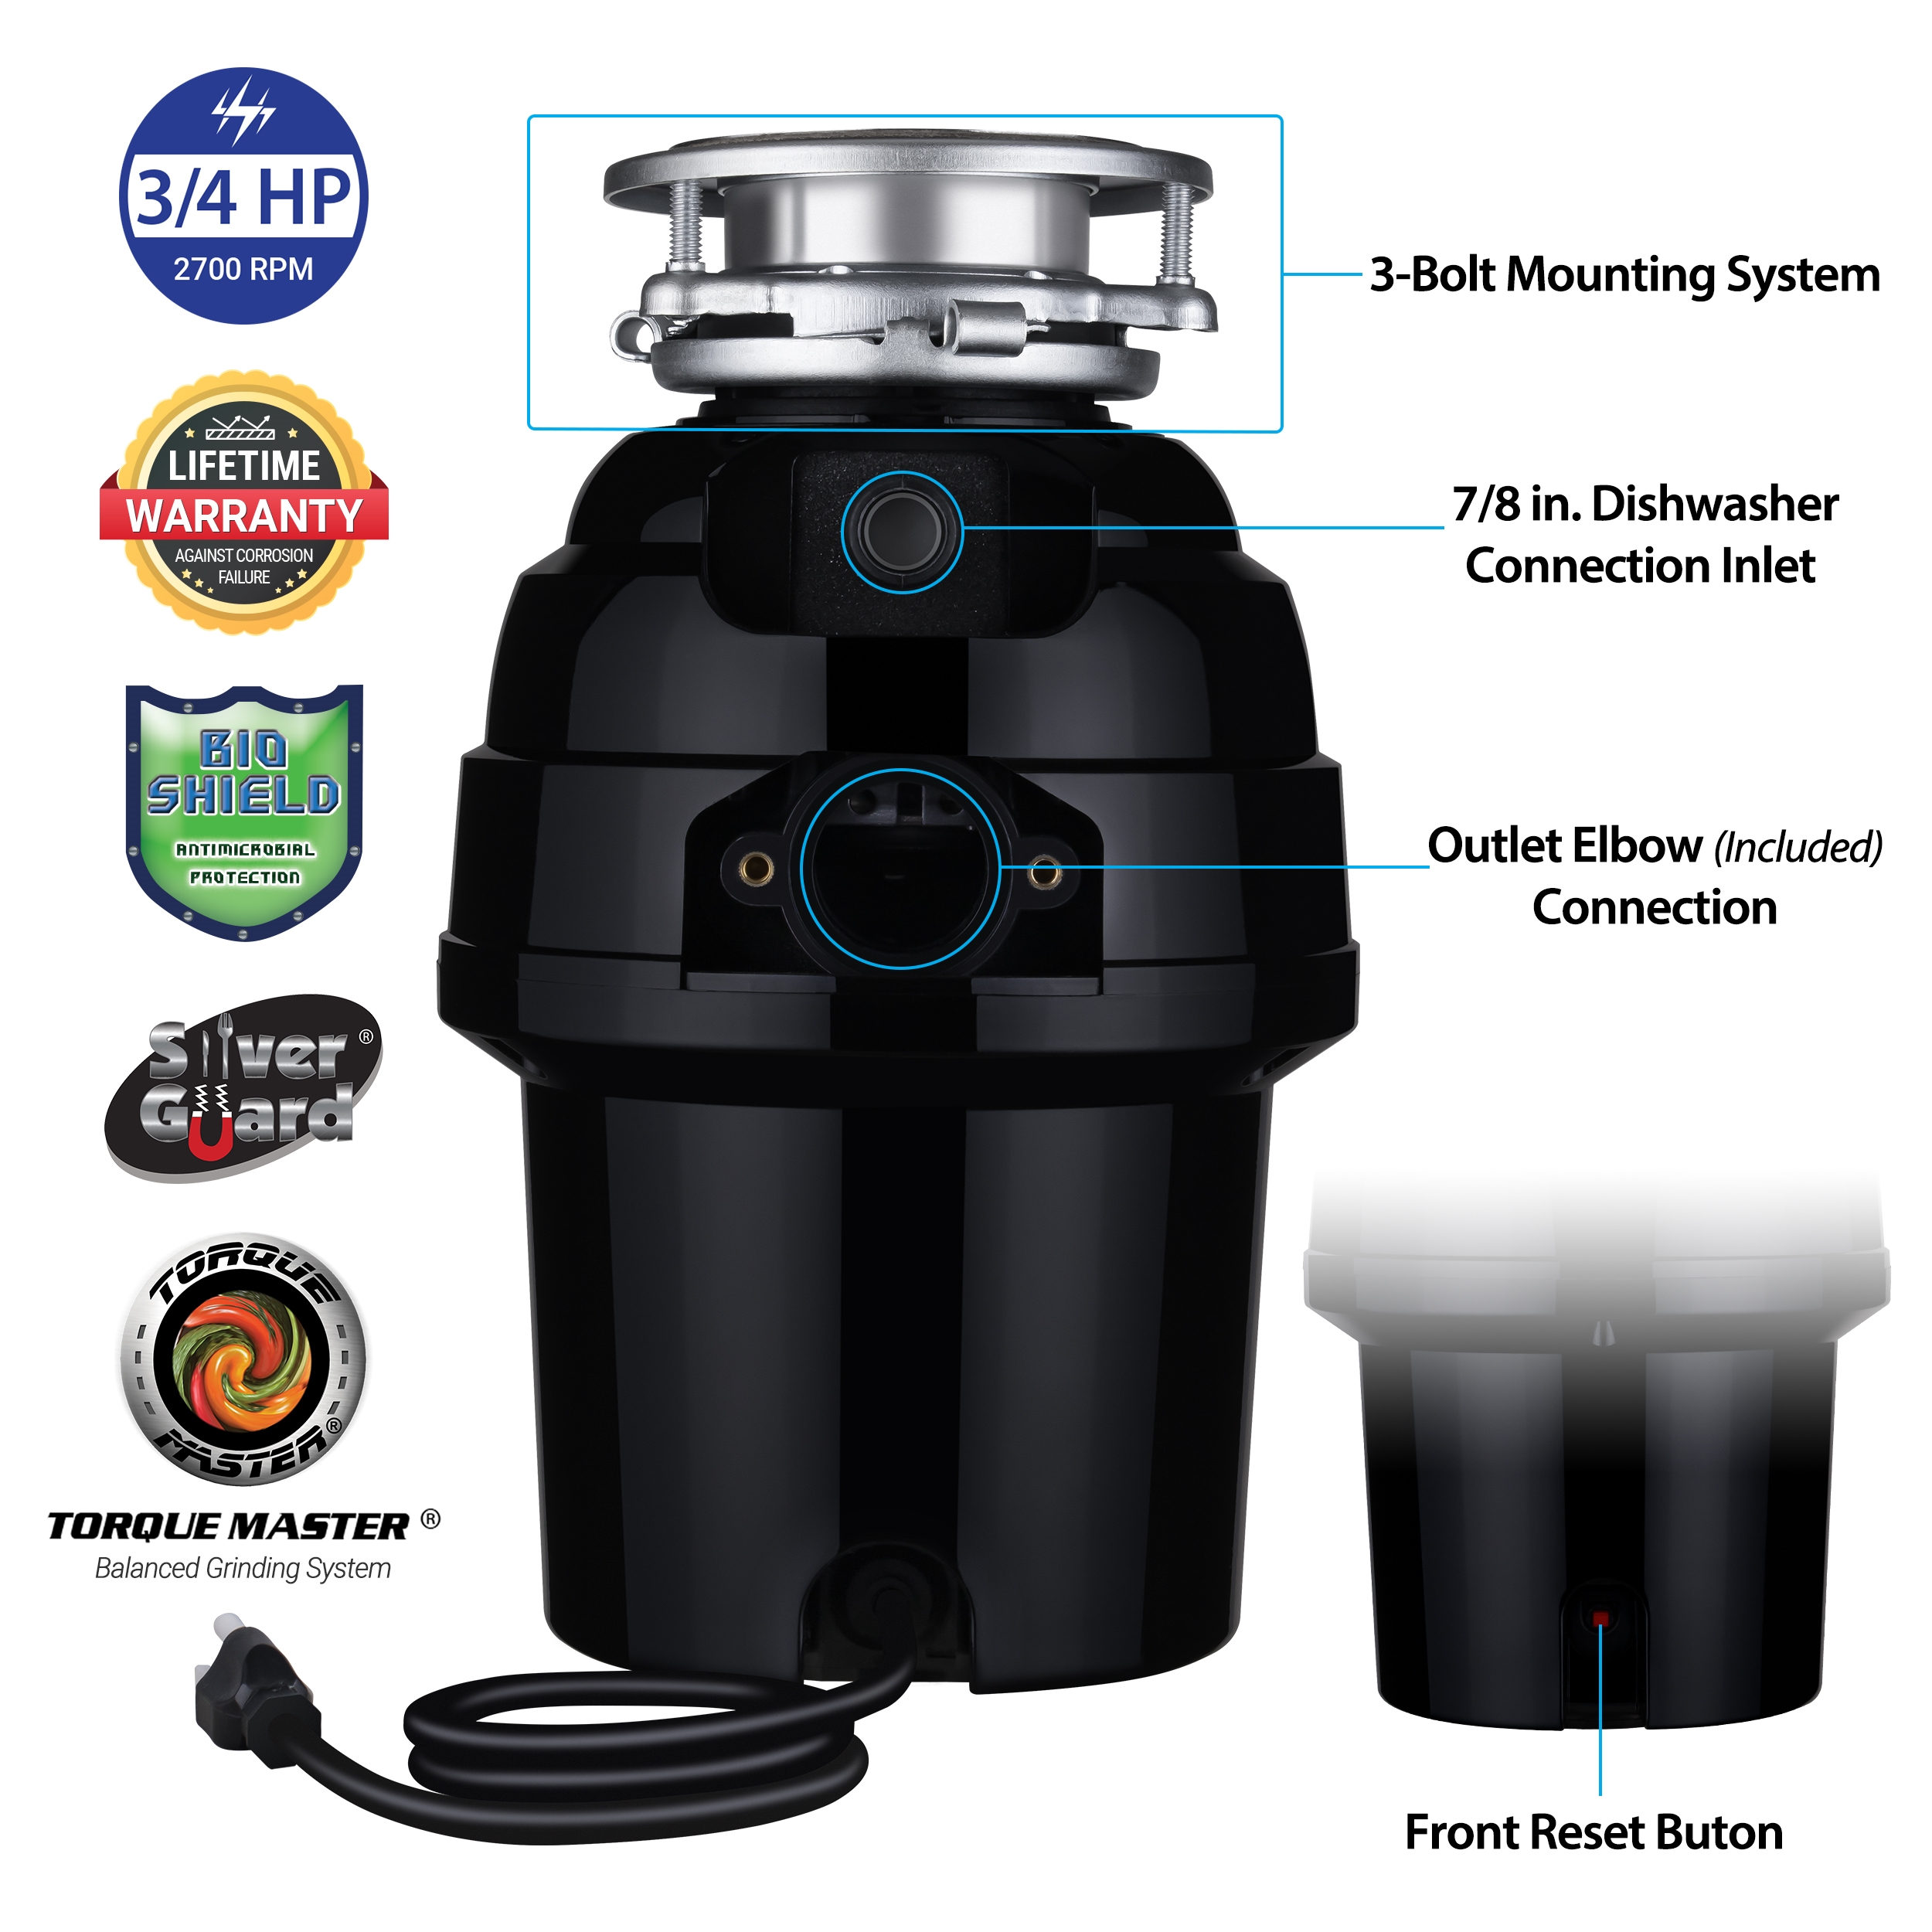 Waste Maid Deluxe 3/4 HP Continuous Feed Garbage Disposal 10-US-WM-458-3B 